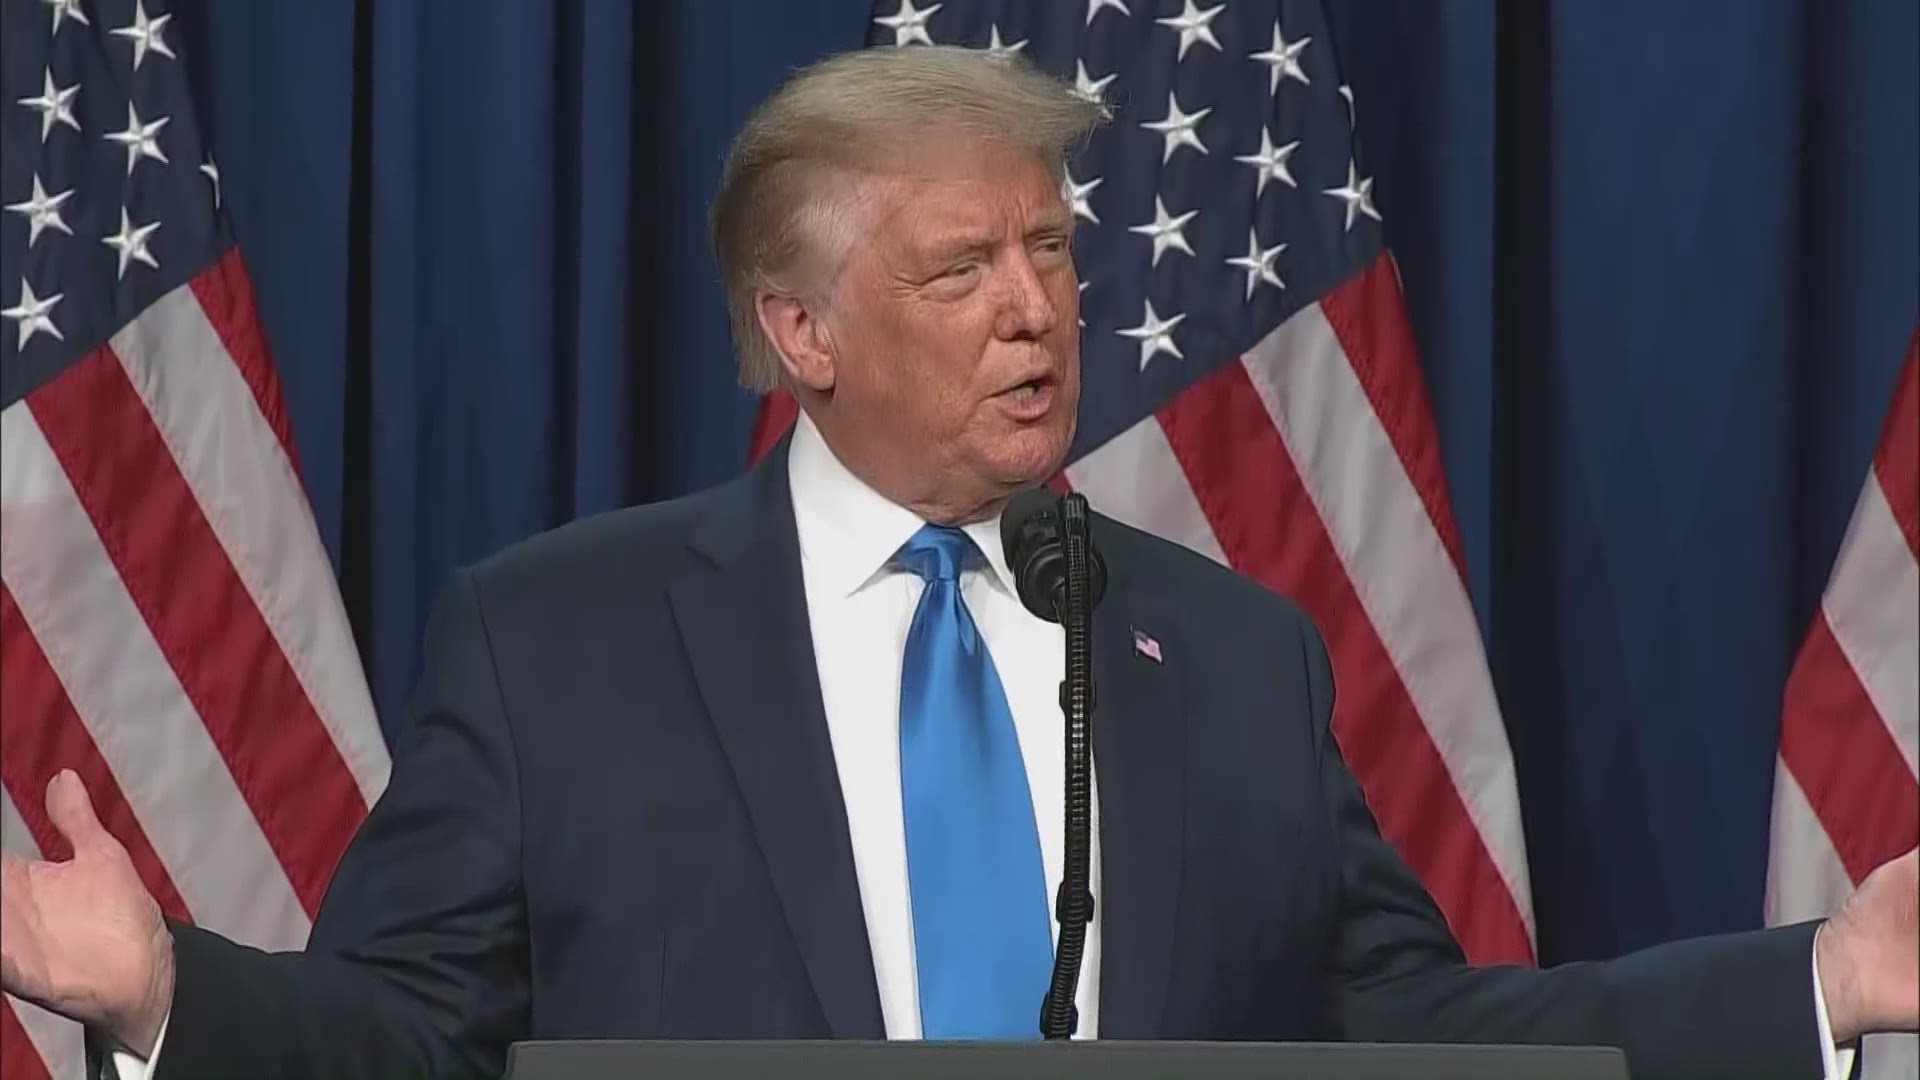 After the Republican National Convention formally re-nominated President Trump, he spoke to the crowd and called 2020 the most important election in US history.